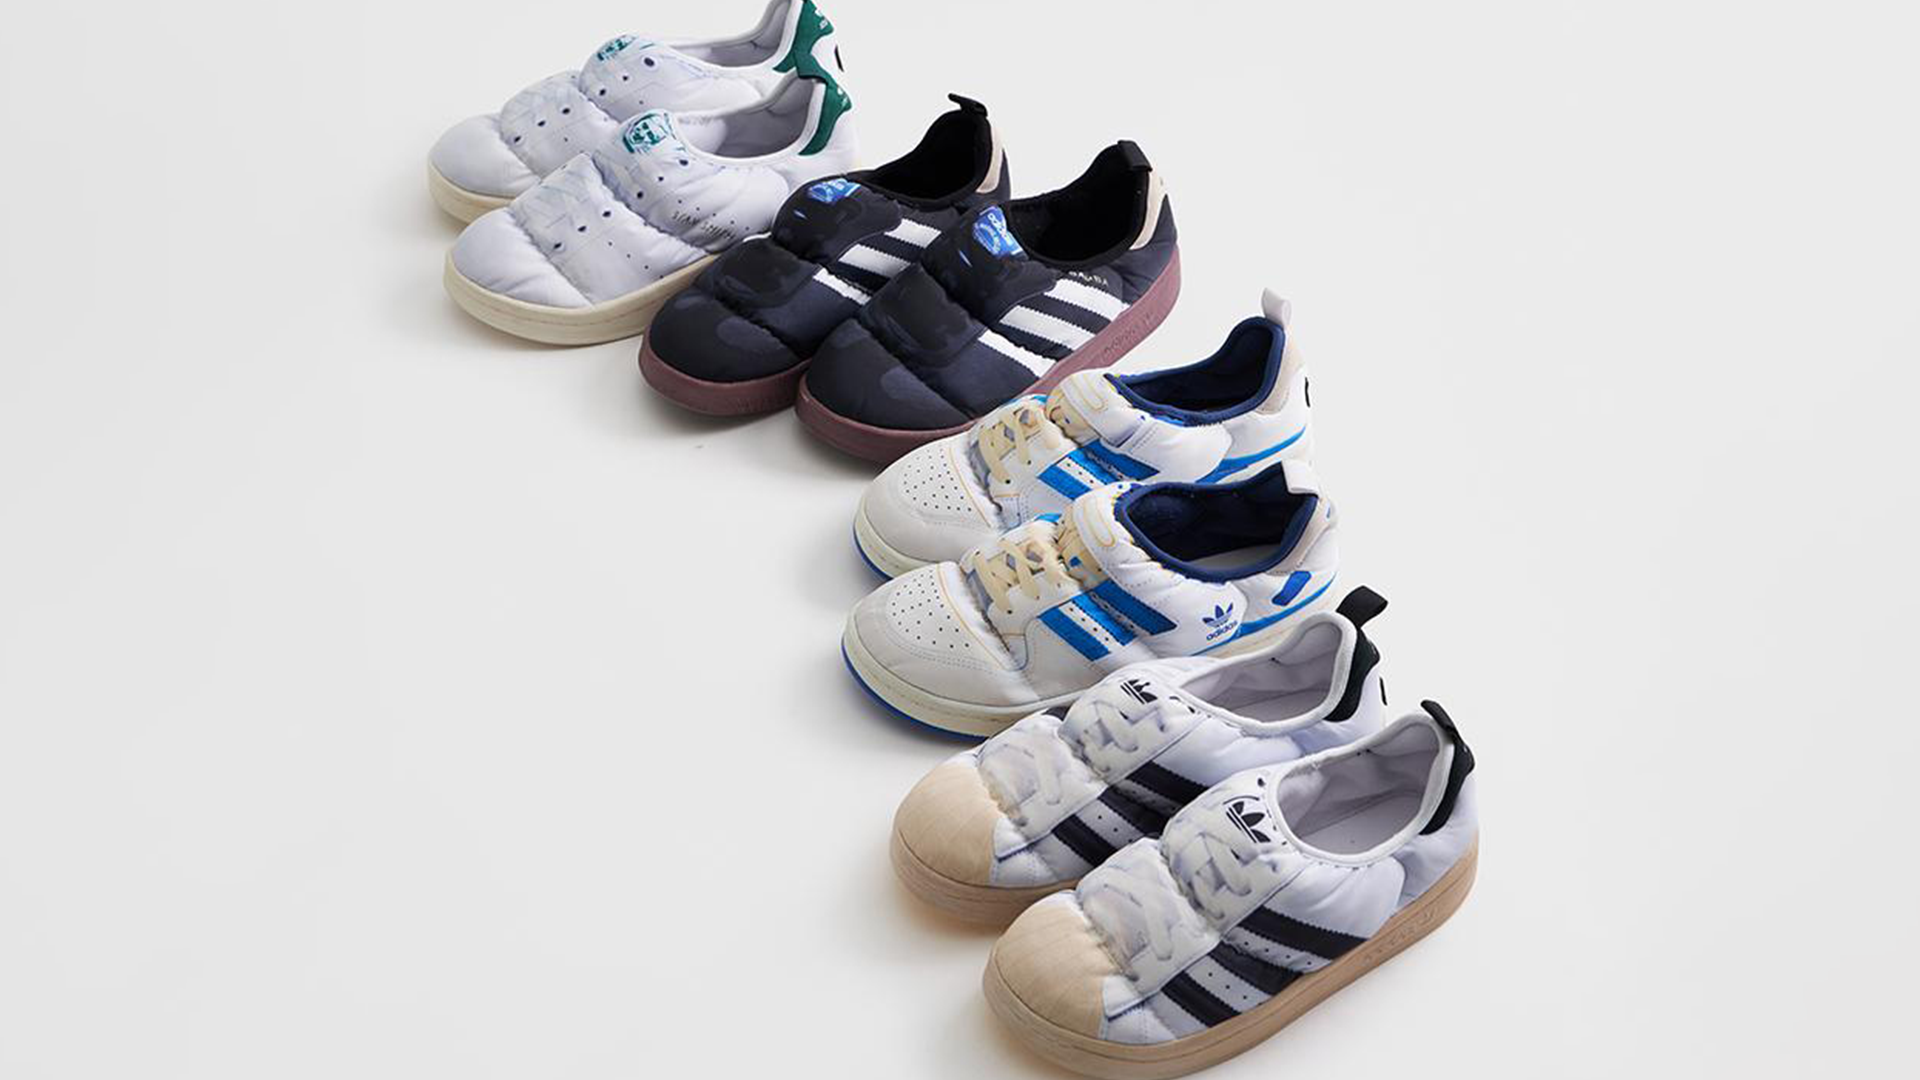 The adidas Originals Puffylette Printed” Pack Adds Cosy Twist to Fan-Fave Styles | The Sole Supplier